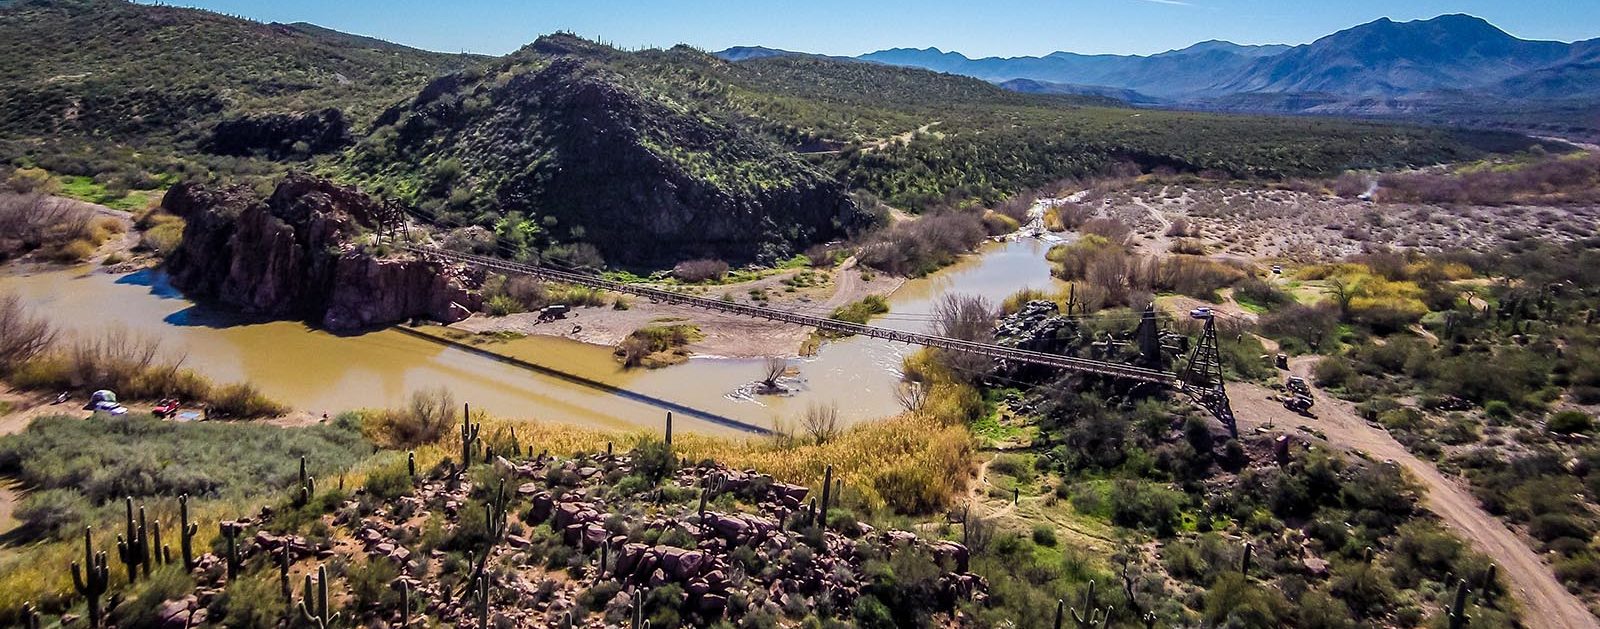 A drones eye view of the Verde River. | CEB Imagery